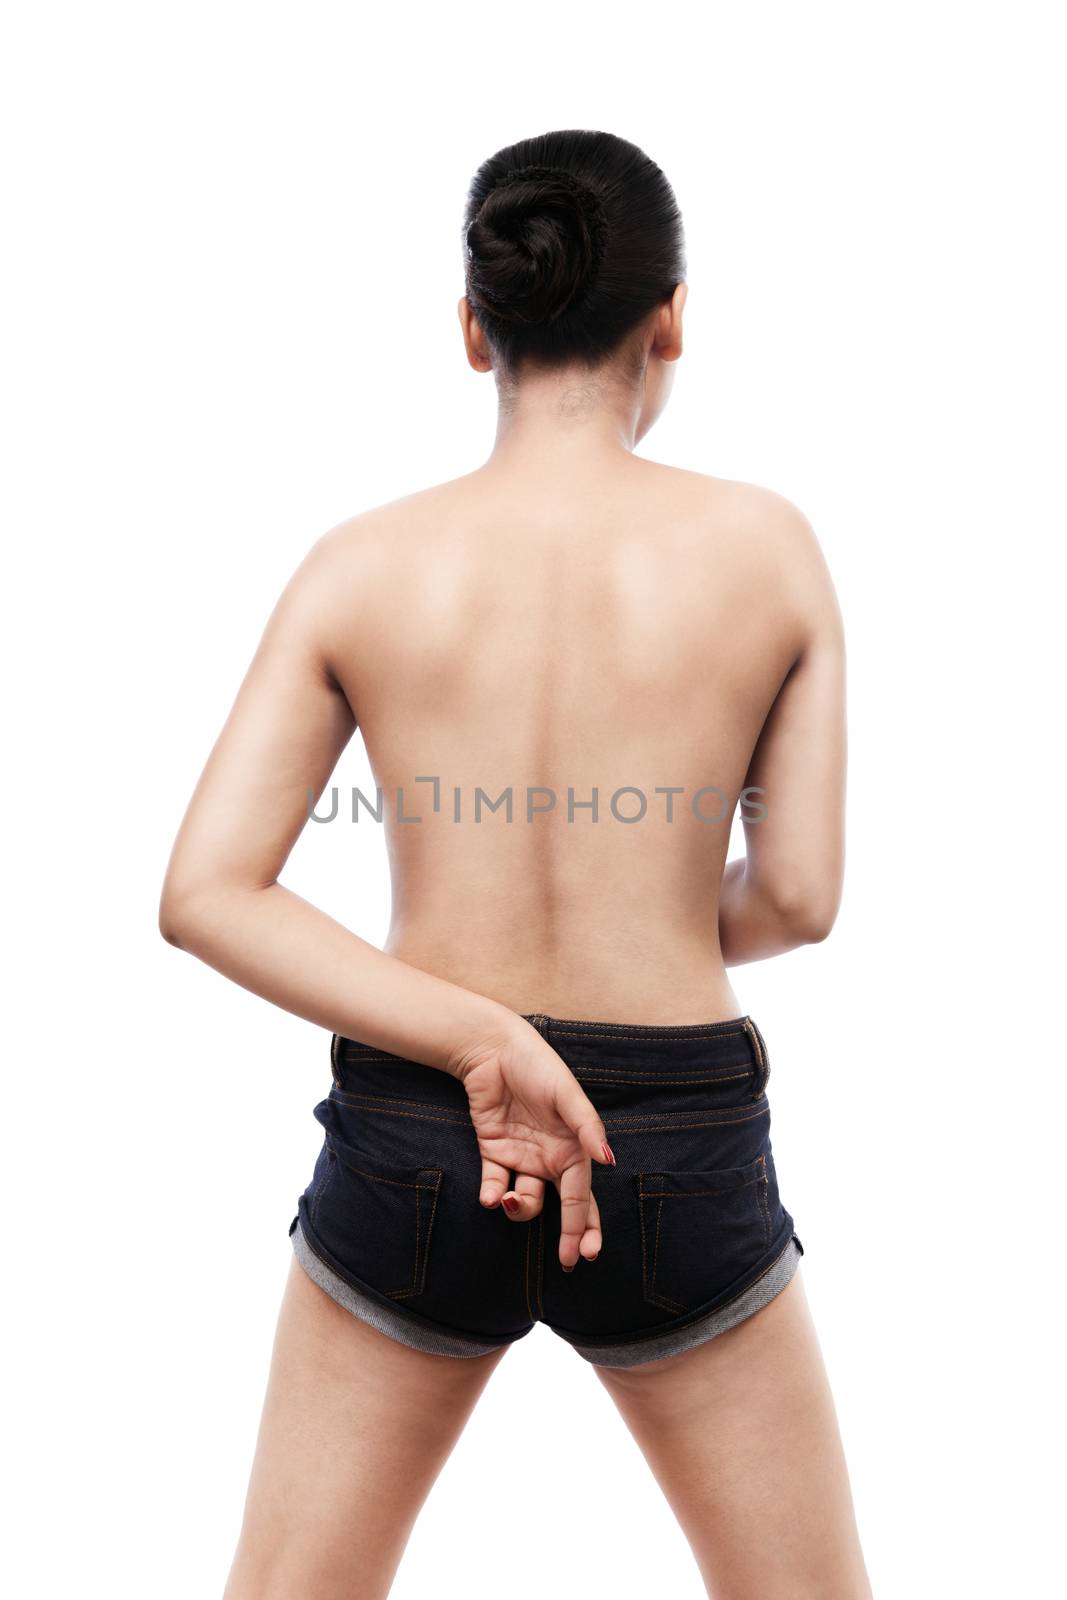 Indian young woman with 'No Sex' sign showing her smooth skinned back and wearing blue jeans isolated on white